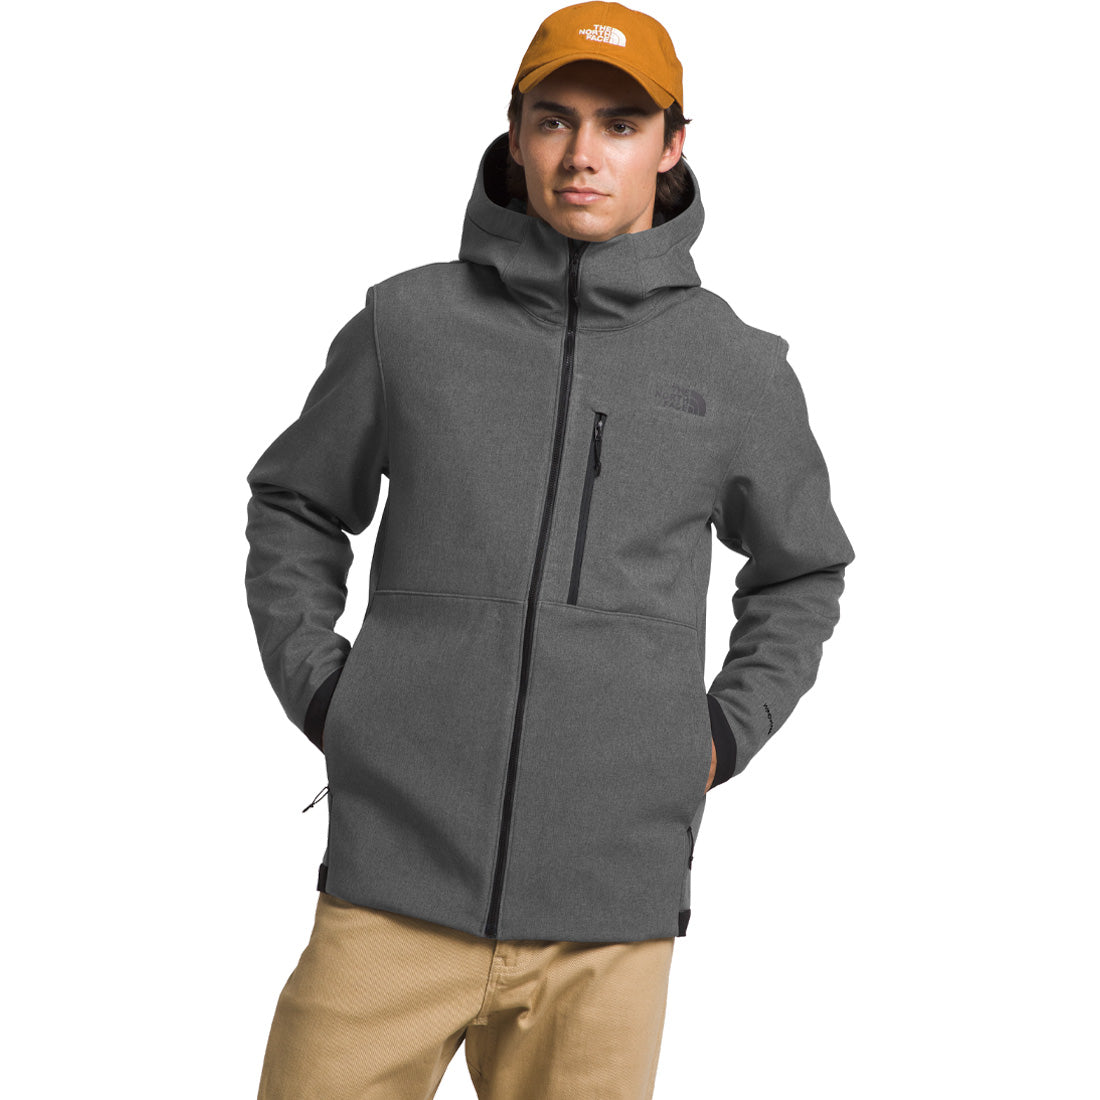 The North Face Apex Bionic 3 Hoodie - Men's